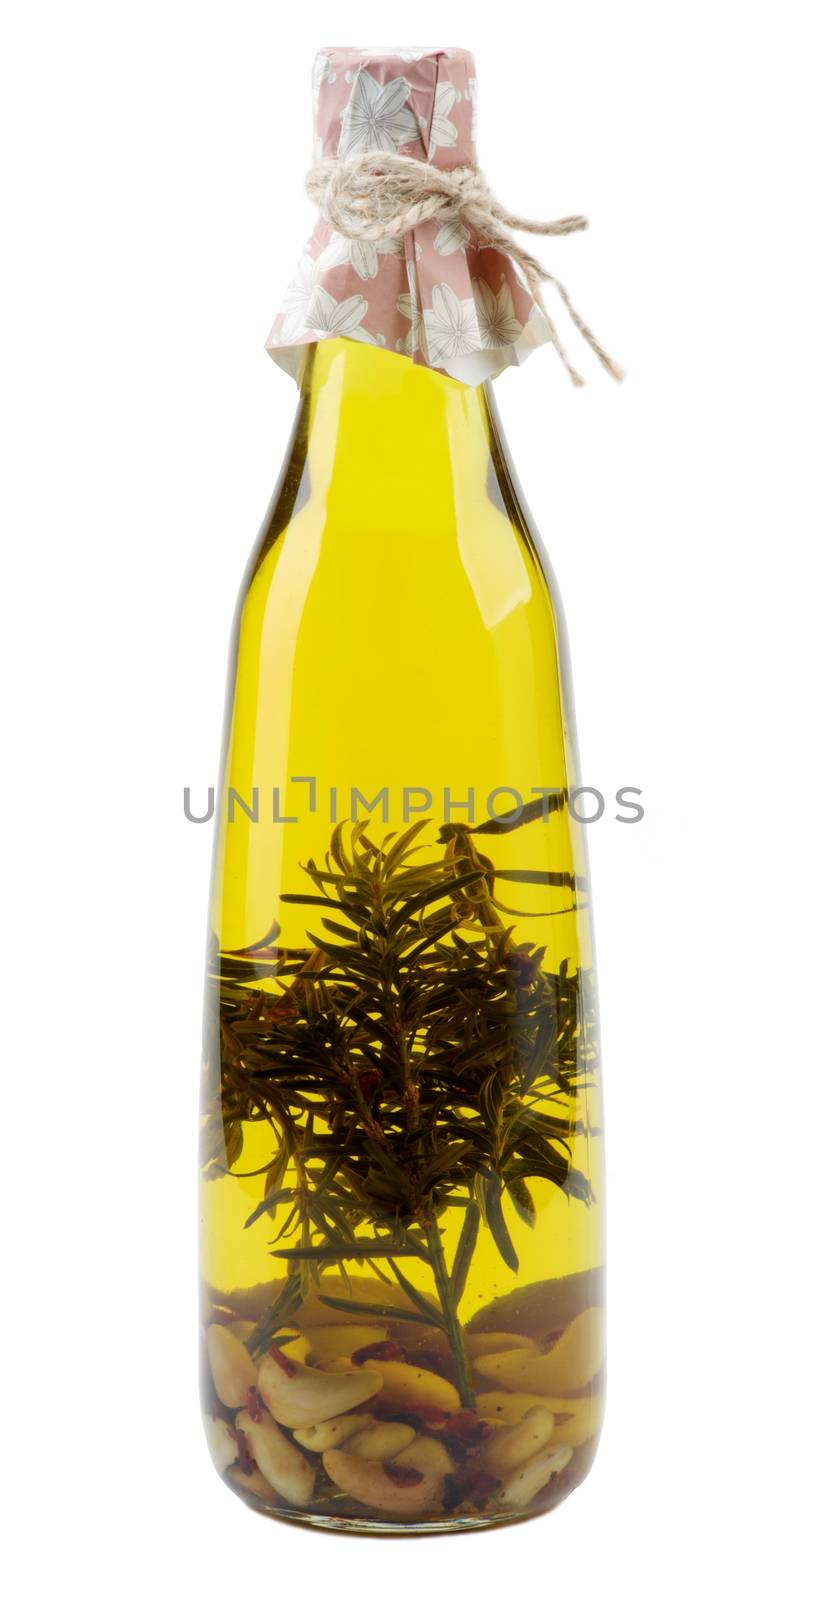 Olive Oil with Rosemary and Garlic by zhekos